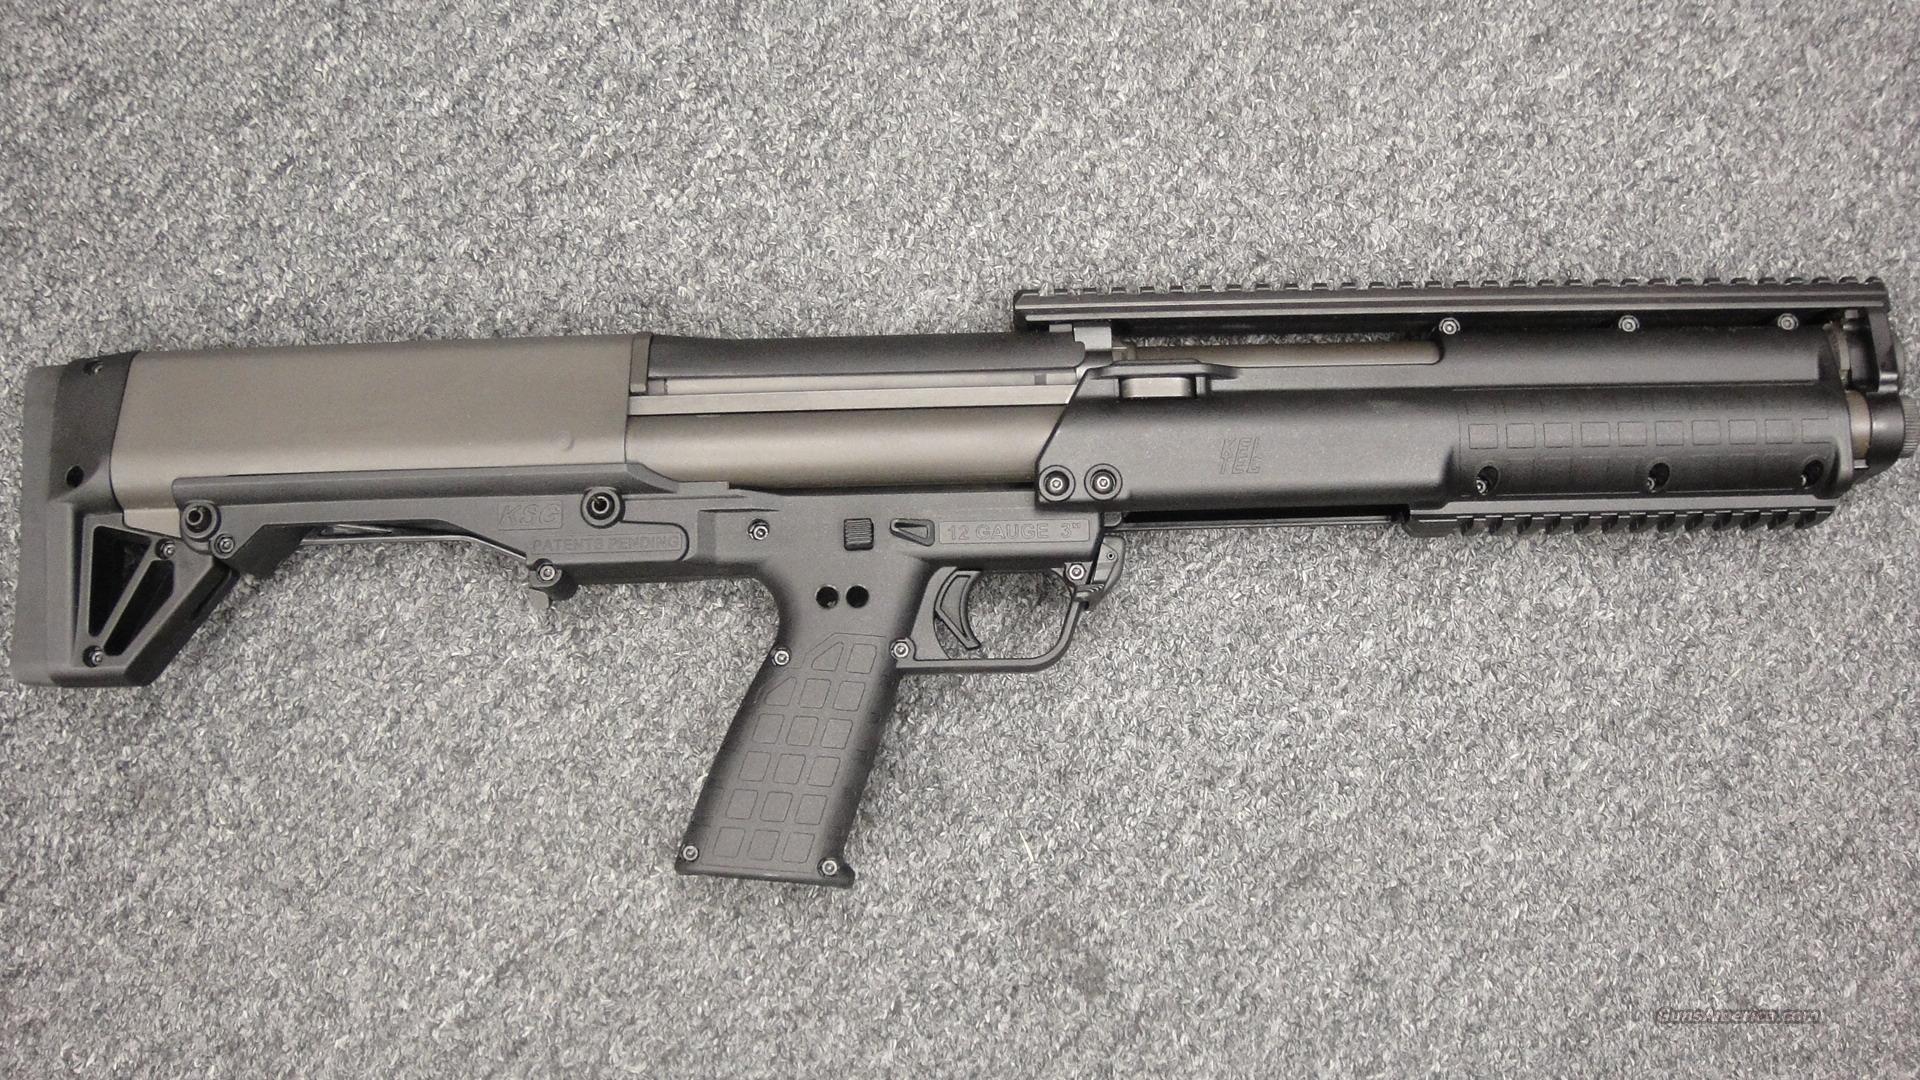 New Kel-Tec KSG in 12 gauge with an 18" barrel and 14 round capacity. 